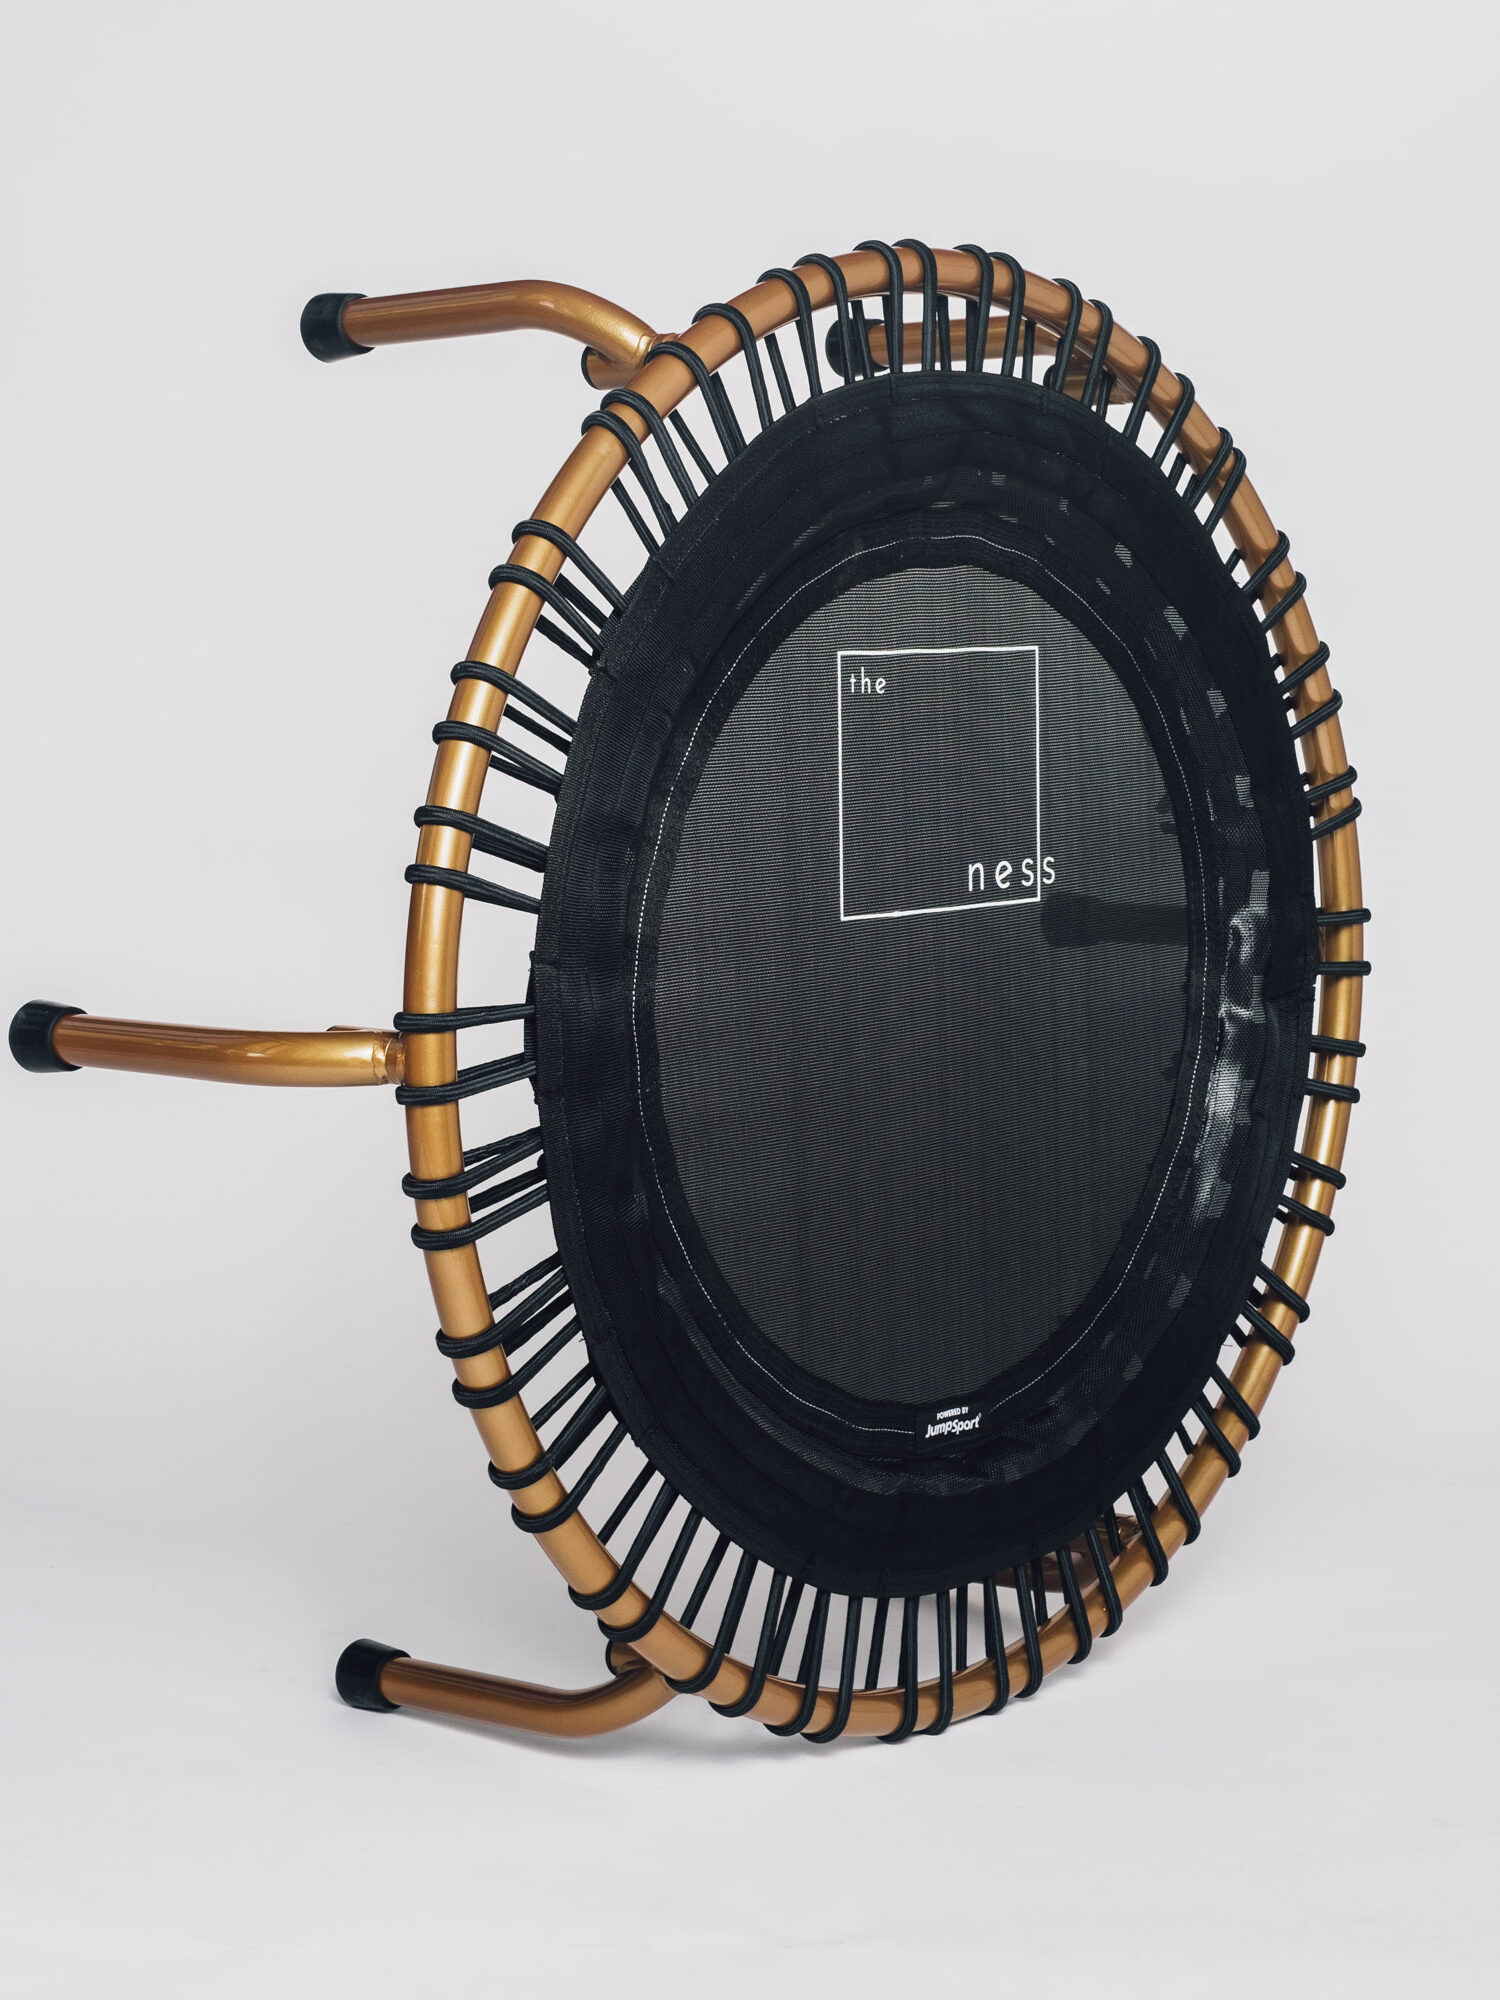 A rebounder trampoline from the Ness